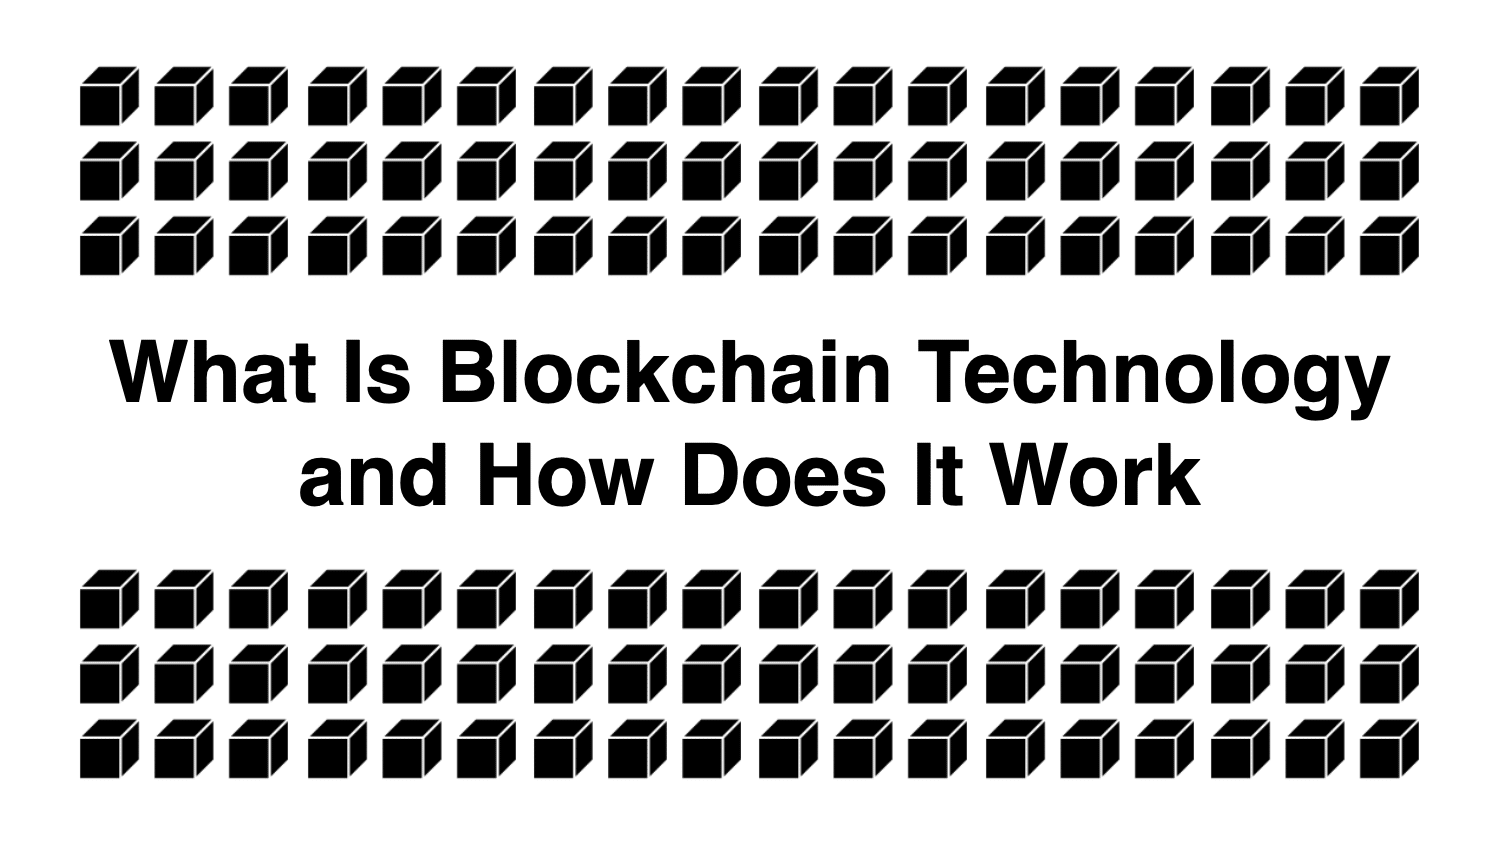 A Concise History of Blockchain Technology